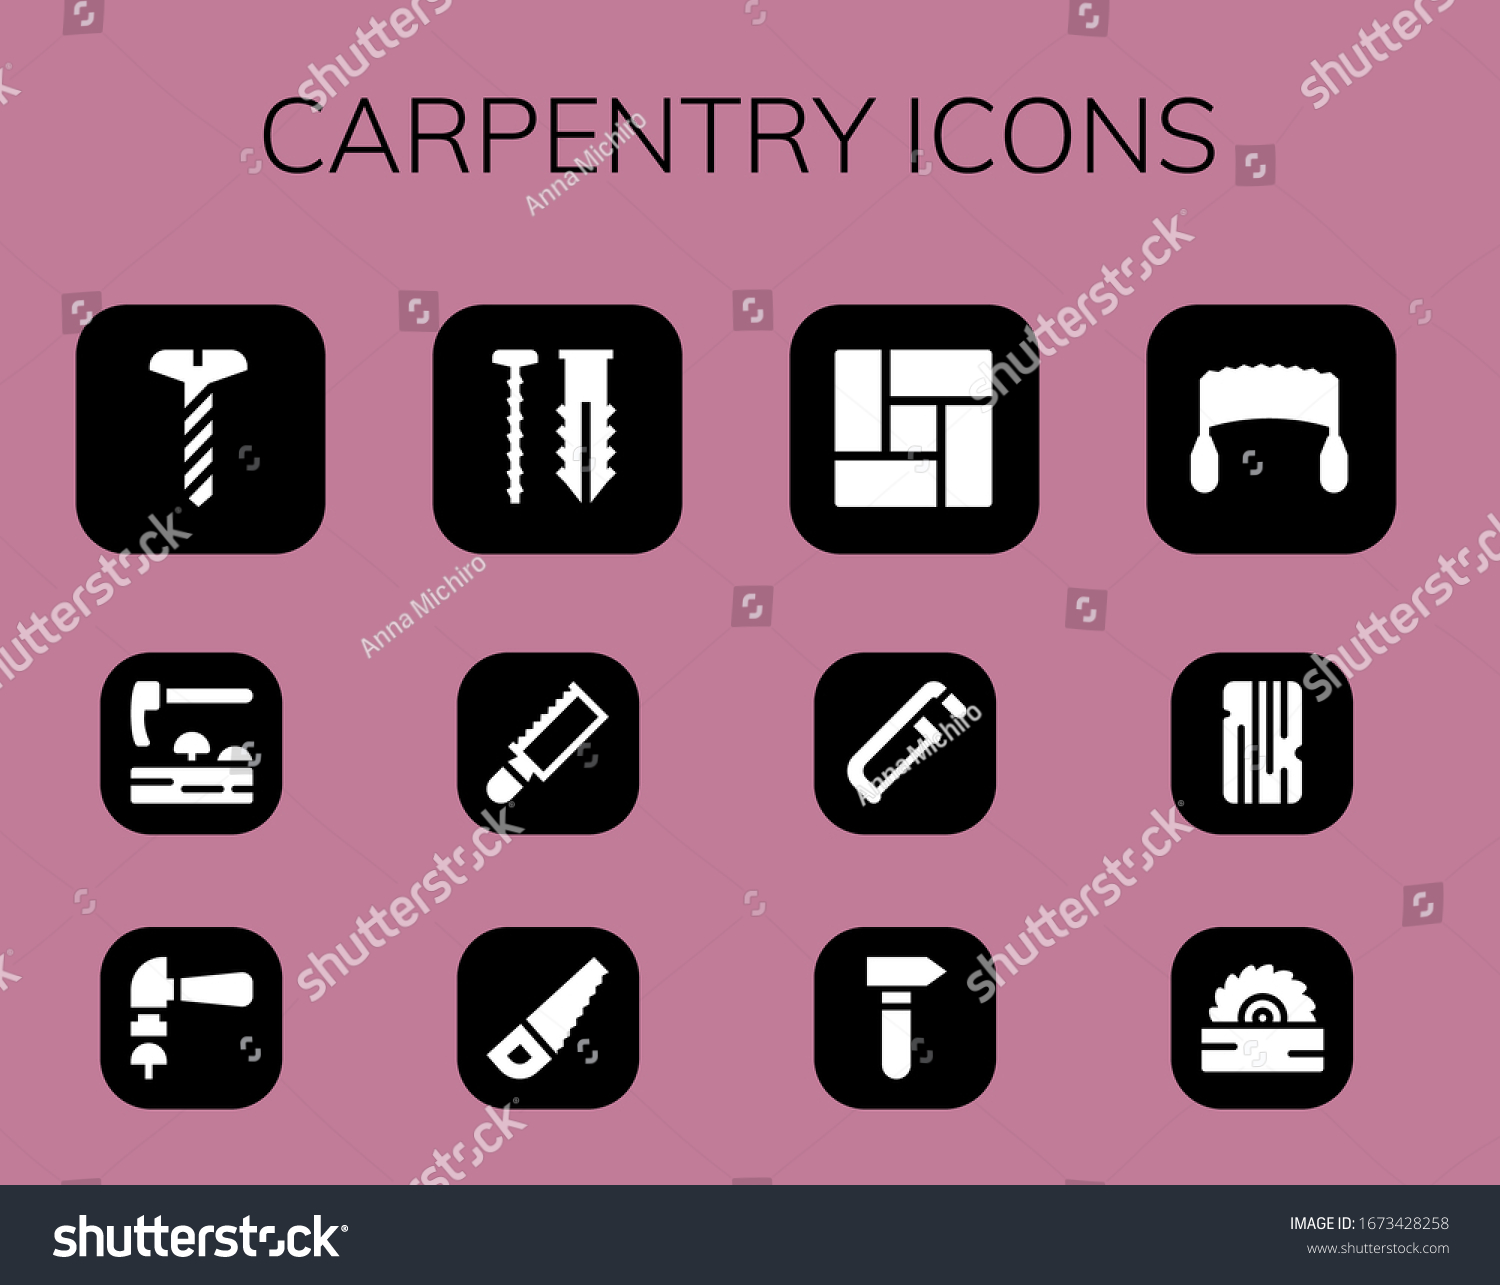 SVG of carpentry icon set. 12 filled carpentry icons.  Simple modern icons such as: Screw, Adze, Hammer, Saw, Floor, Wood svg